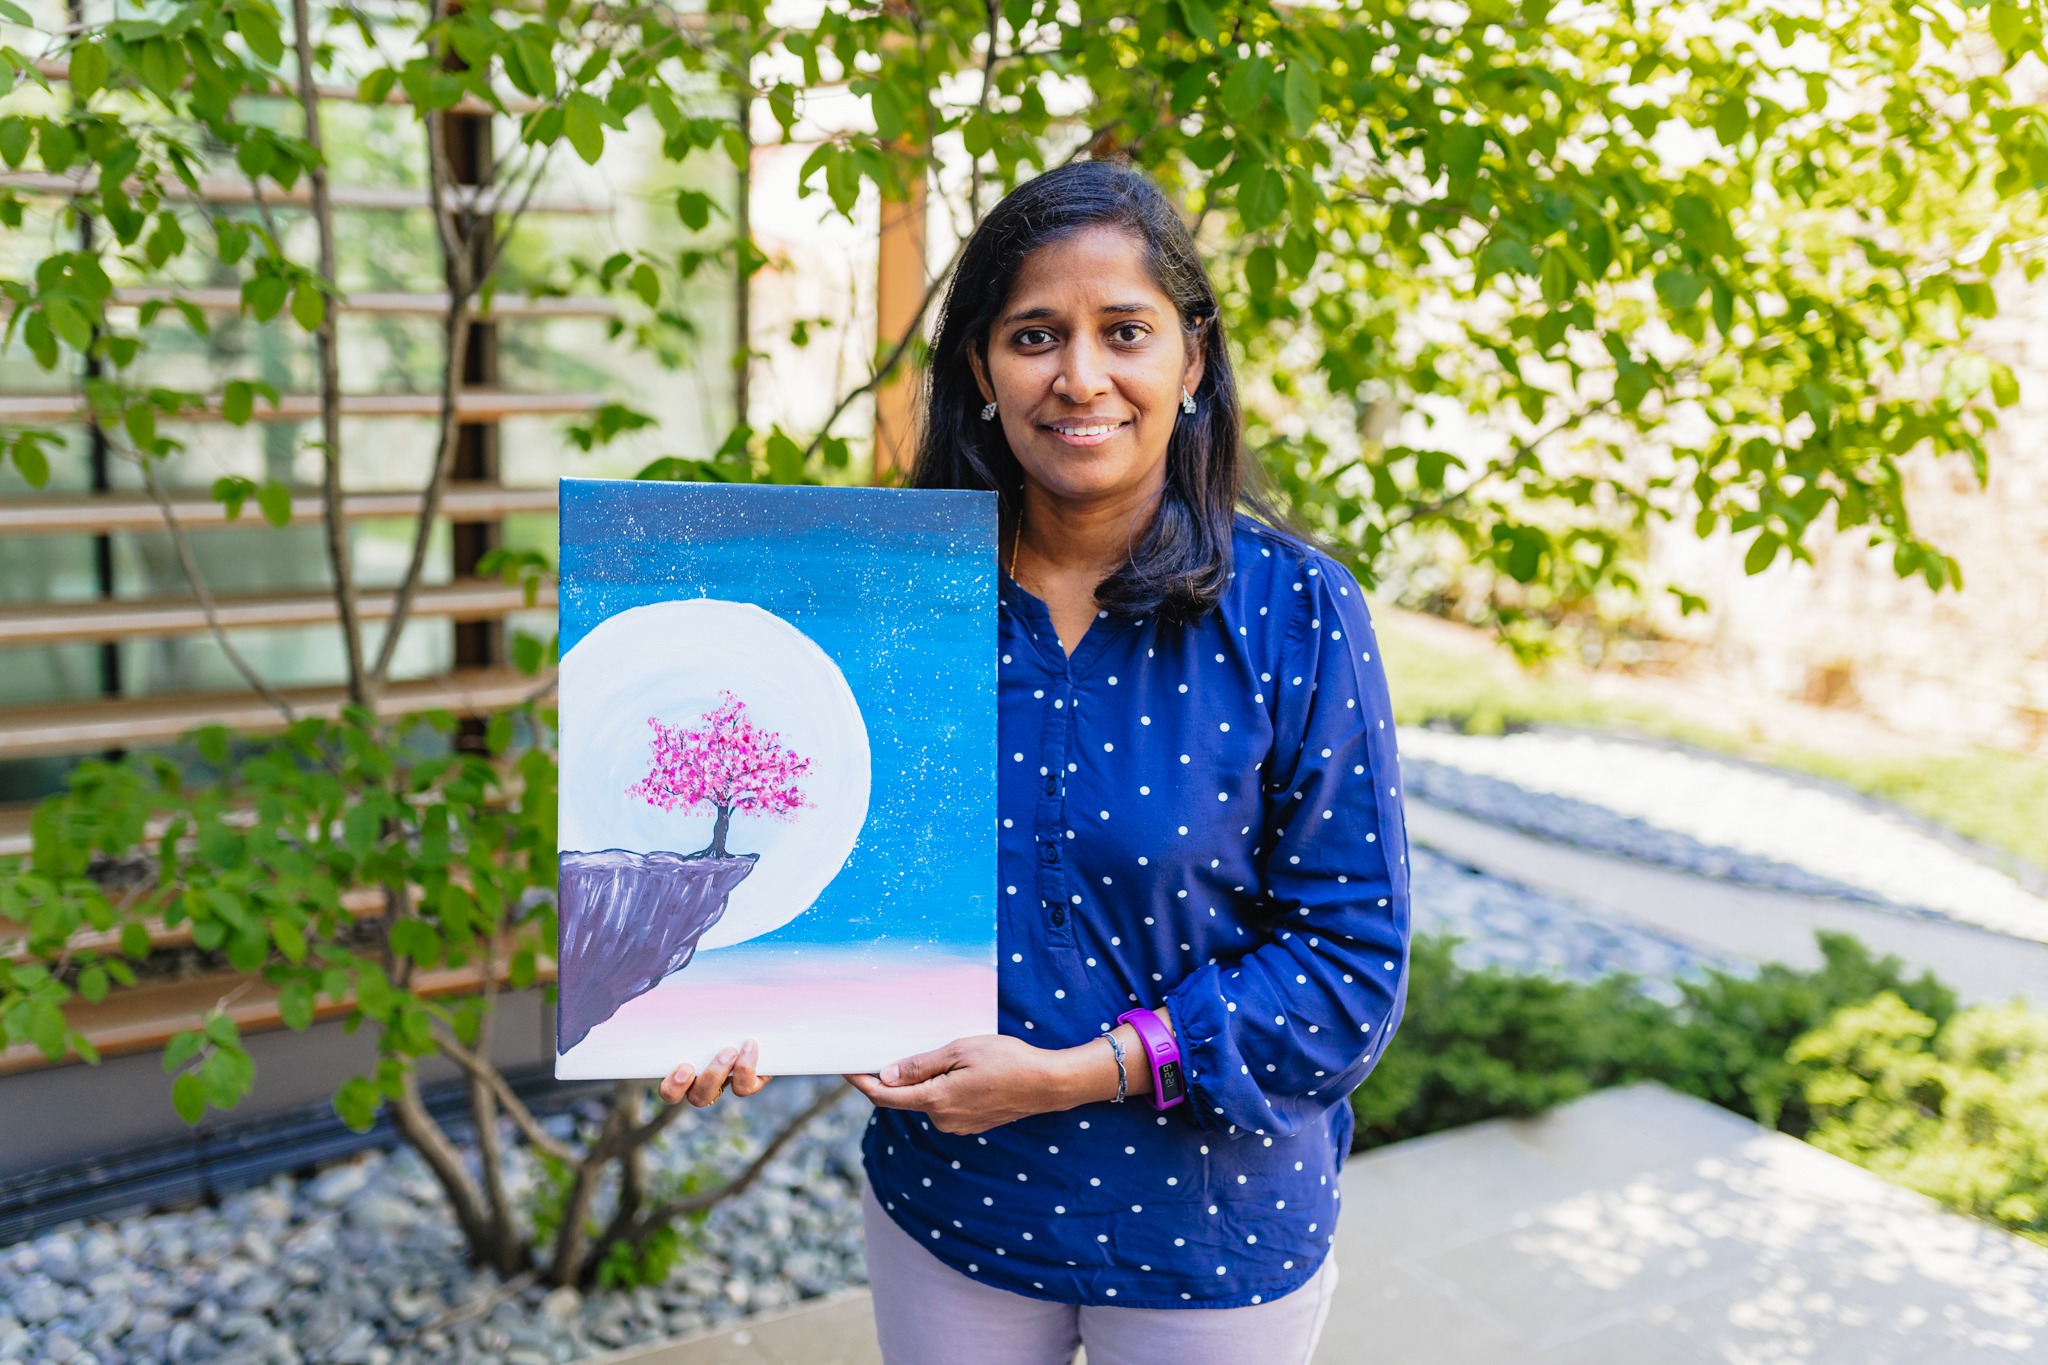 Suganya Vadivelu holding up a drawing she made during the art classes provided by Dundas Valley School of Art